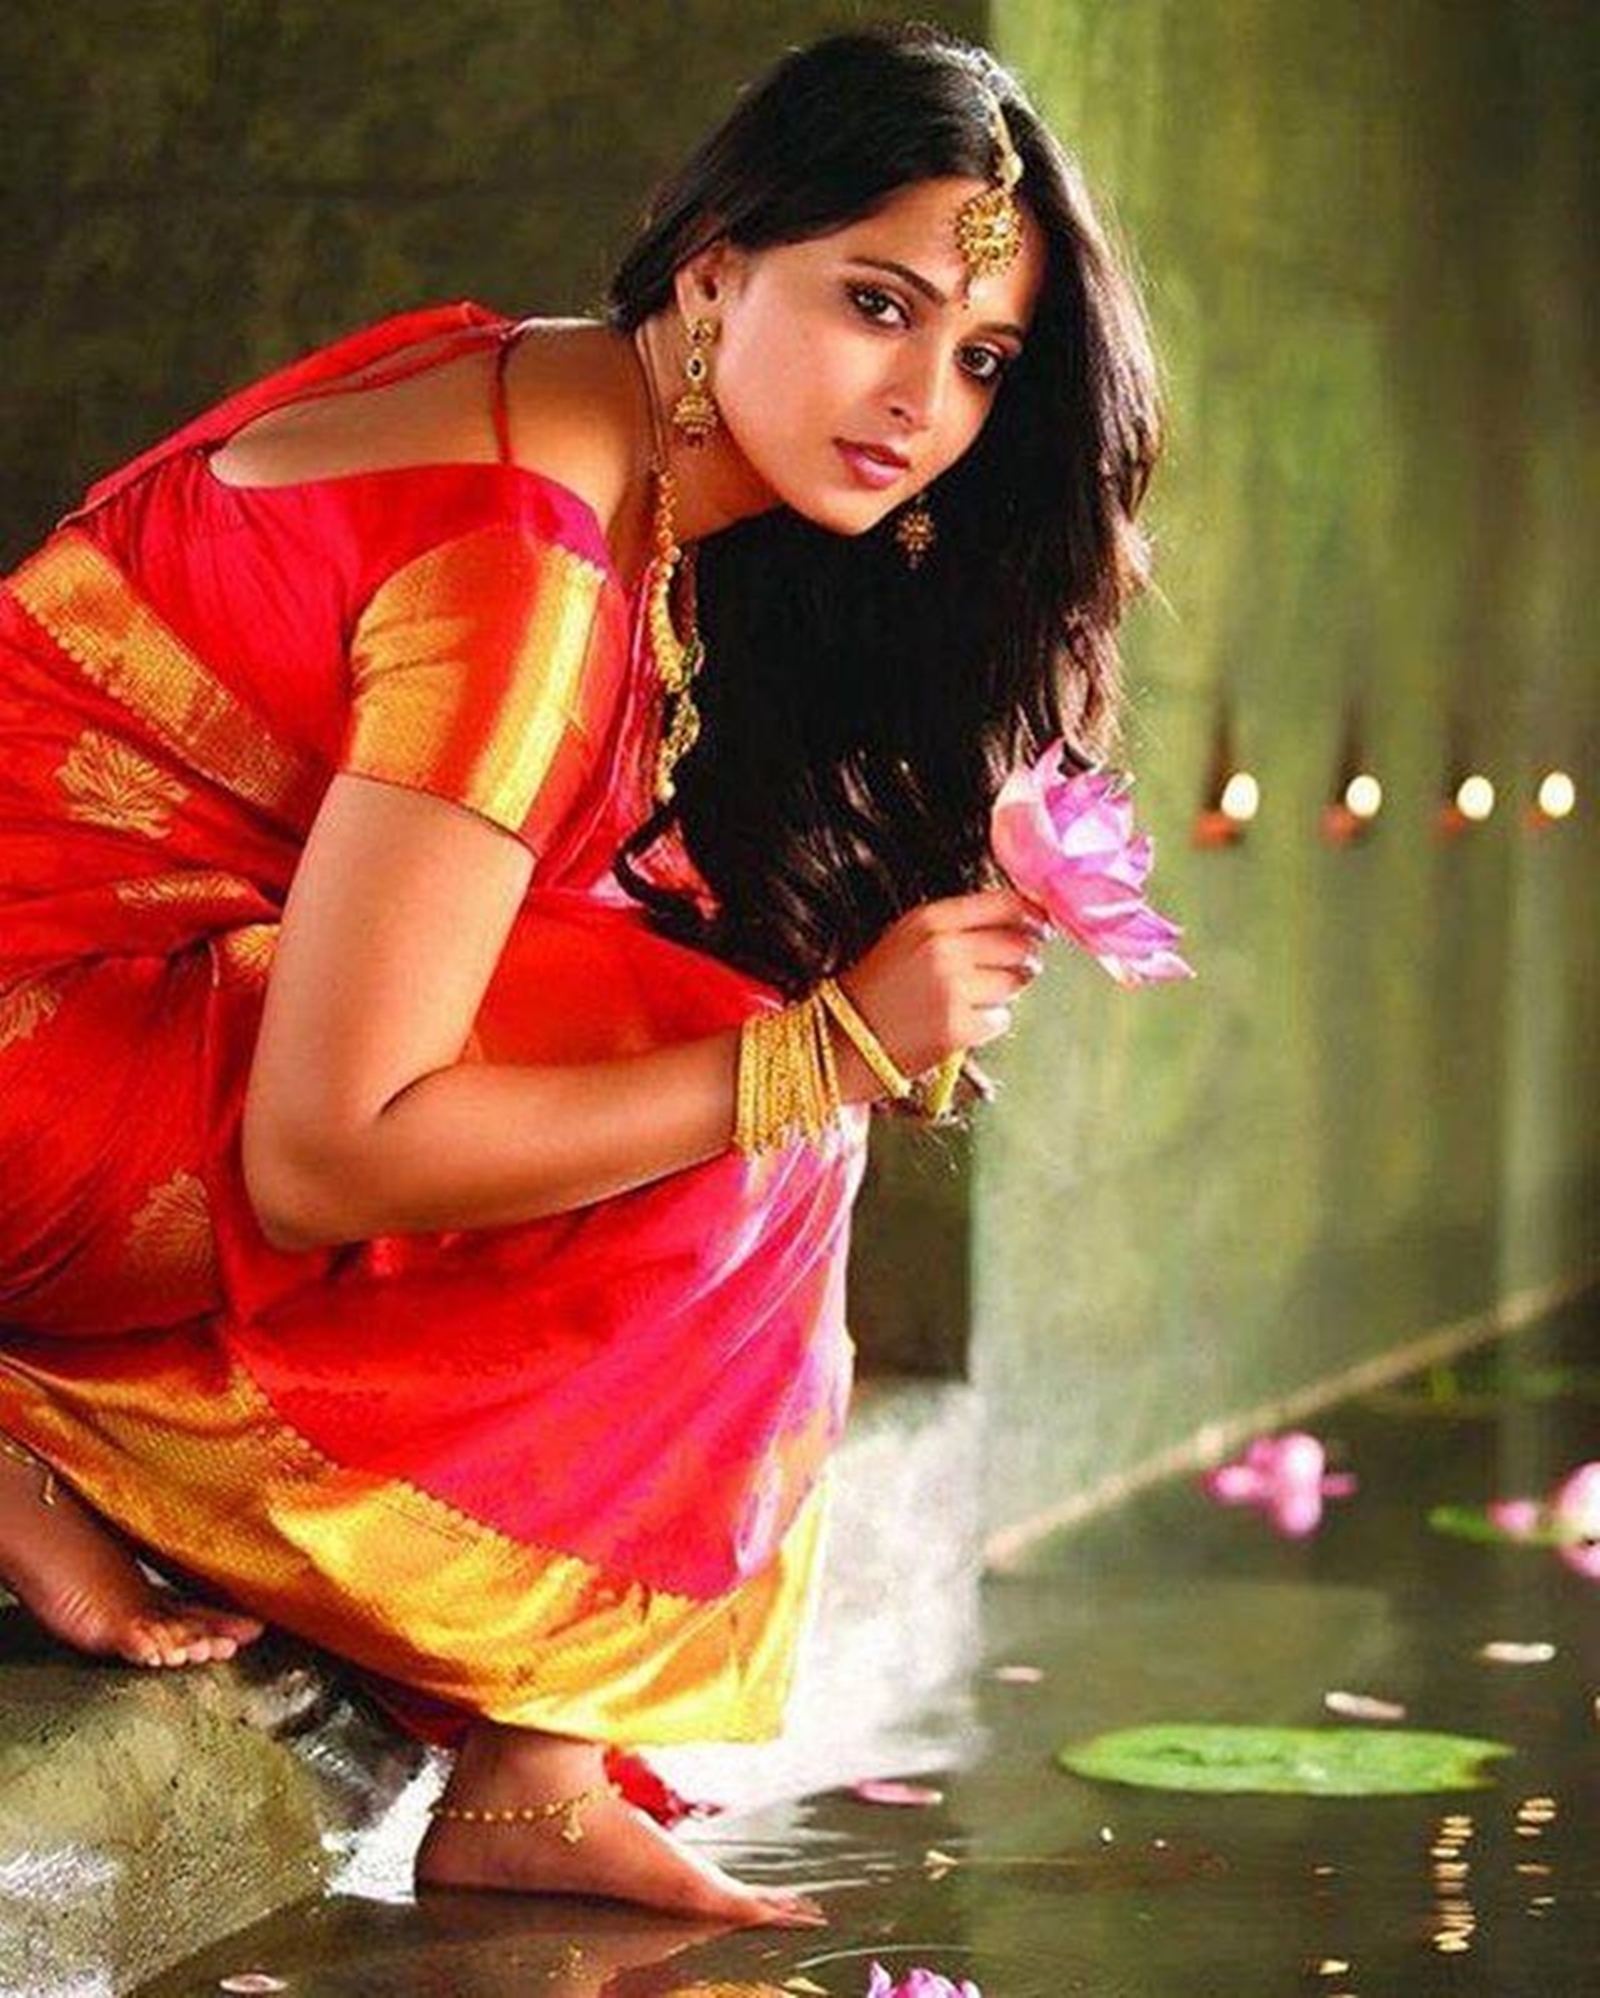 Anushka Free Xxx - The Anushka Shetty style: Defying odds while being the mistress of own  decisions | Telugu News - The Indian Express